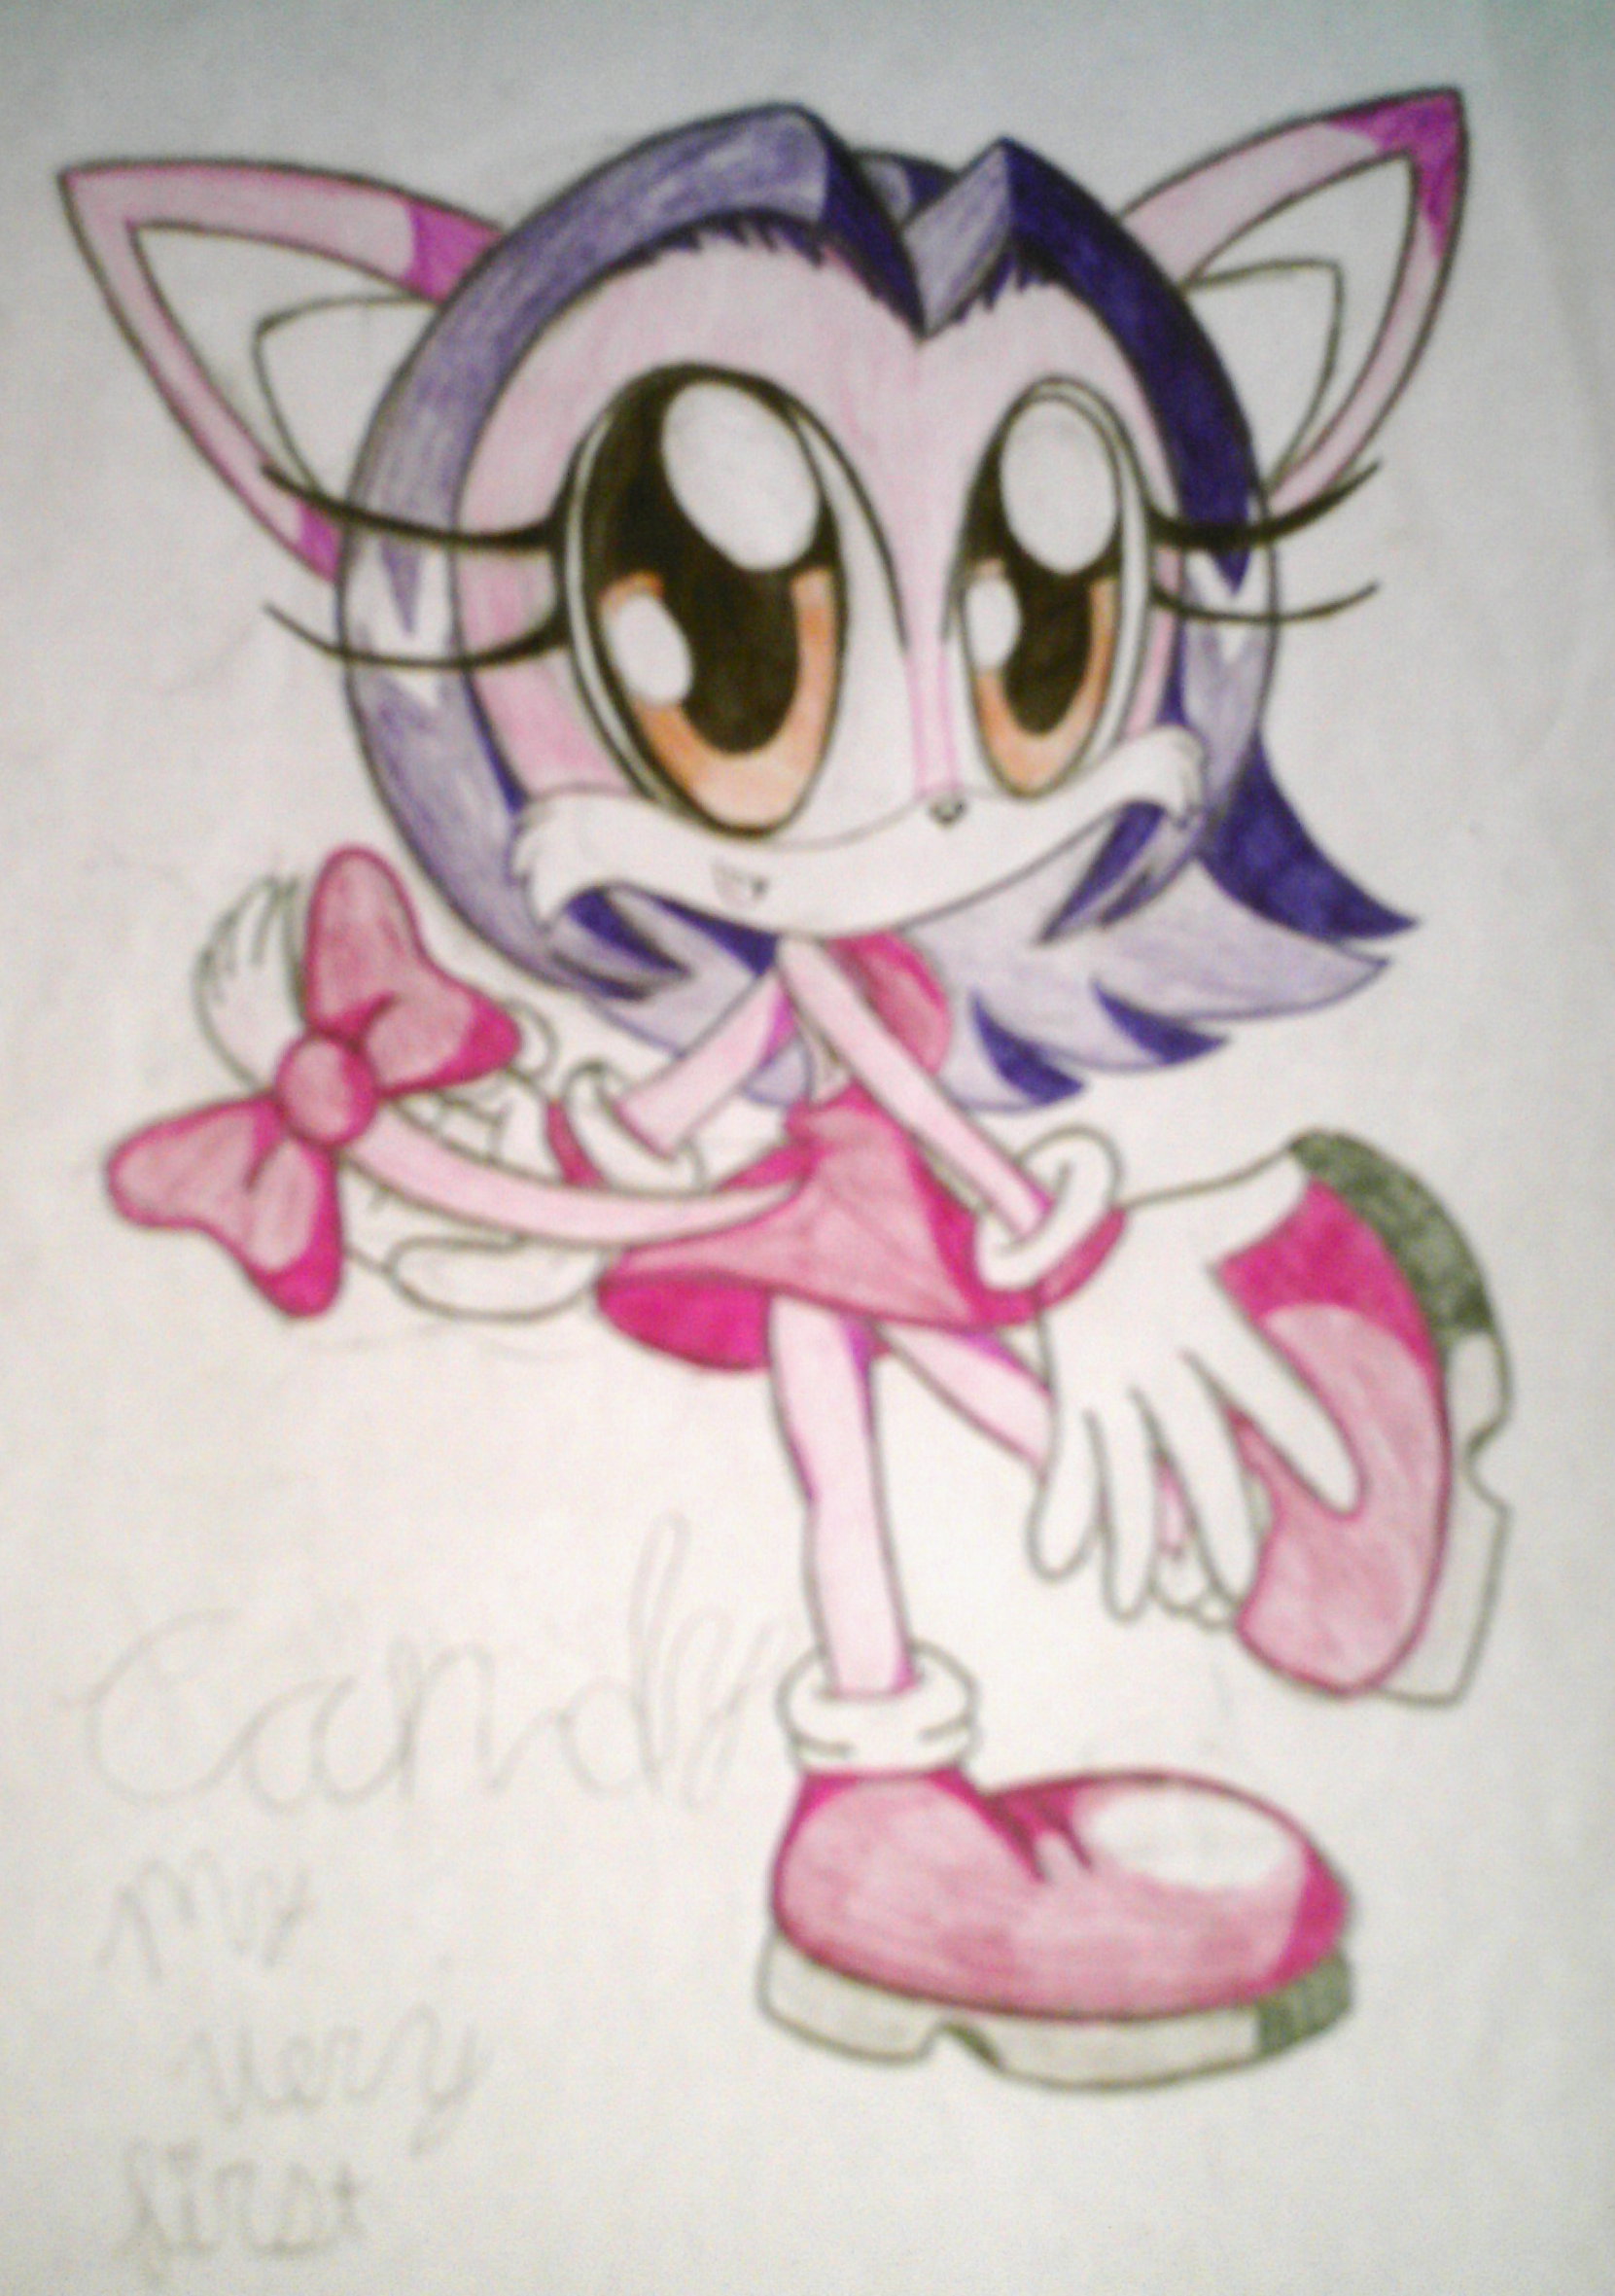 Candy the Cat by HyperHugs